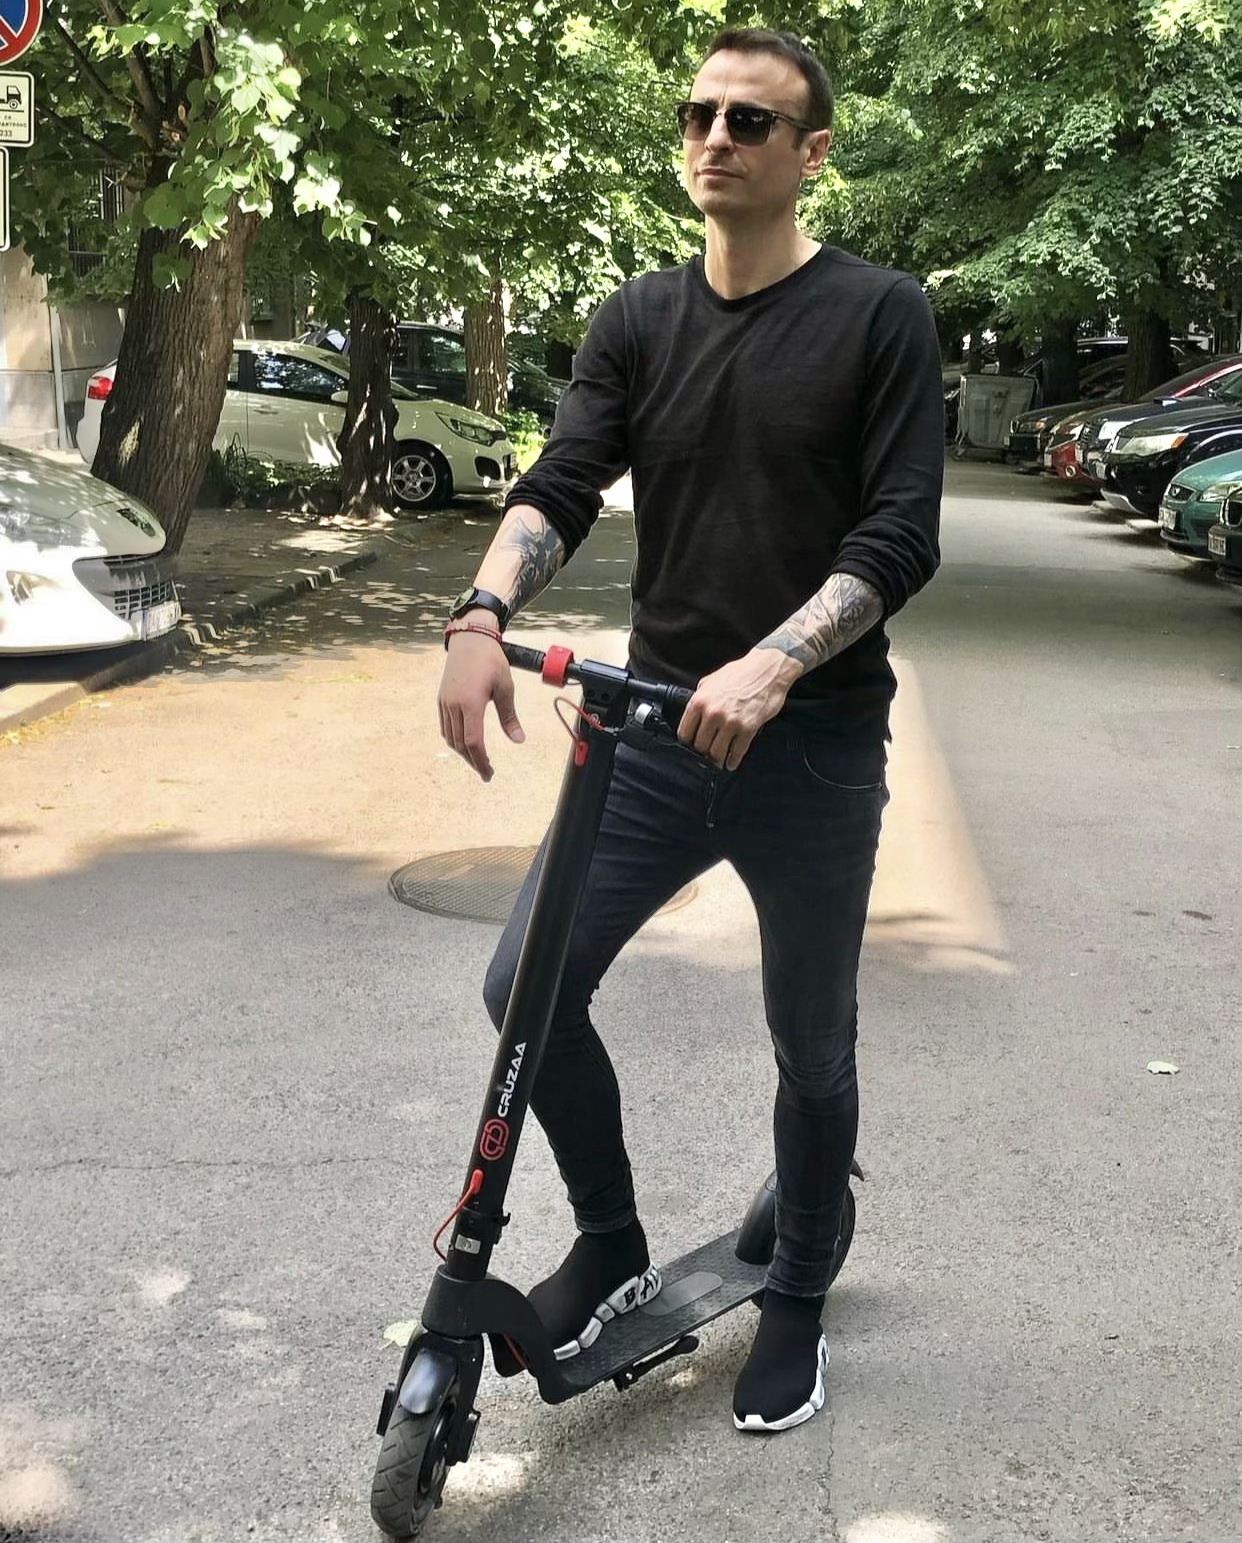 The Commuta Pro Max Electric Foldable Scooter - 75km Range and 40kmh Max Speed.  - ships from UK, Goodies N Stuff